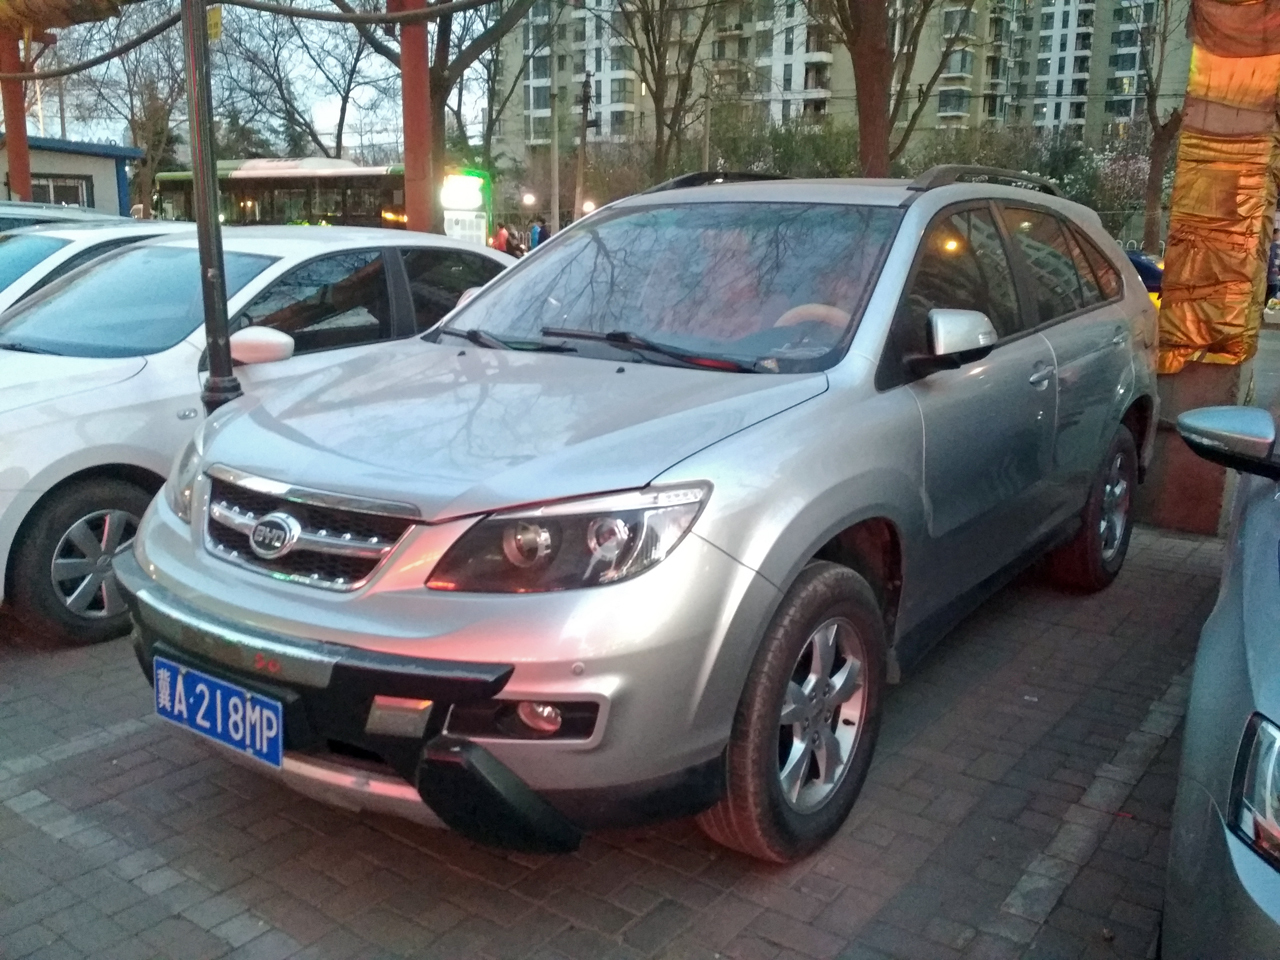 Auto fakes and auto crafts - My, Auto, Chinese car industry, China, China inside out, Fake, Imitation, UAZ-469, Donkey, , Cab, Foreign cars, Longpost